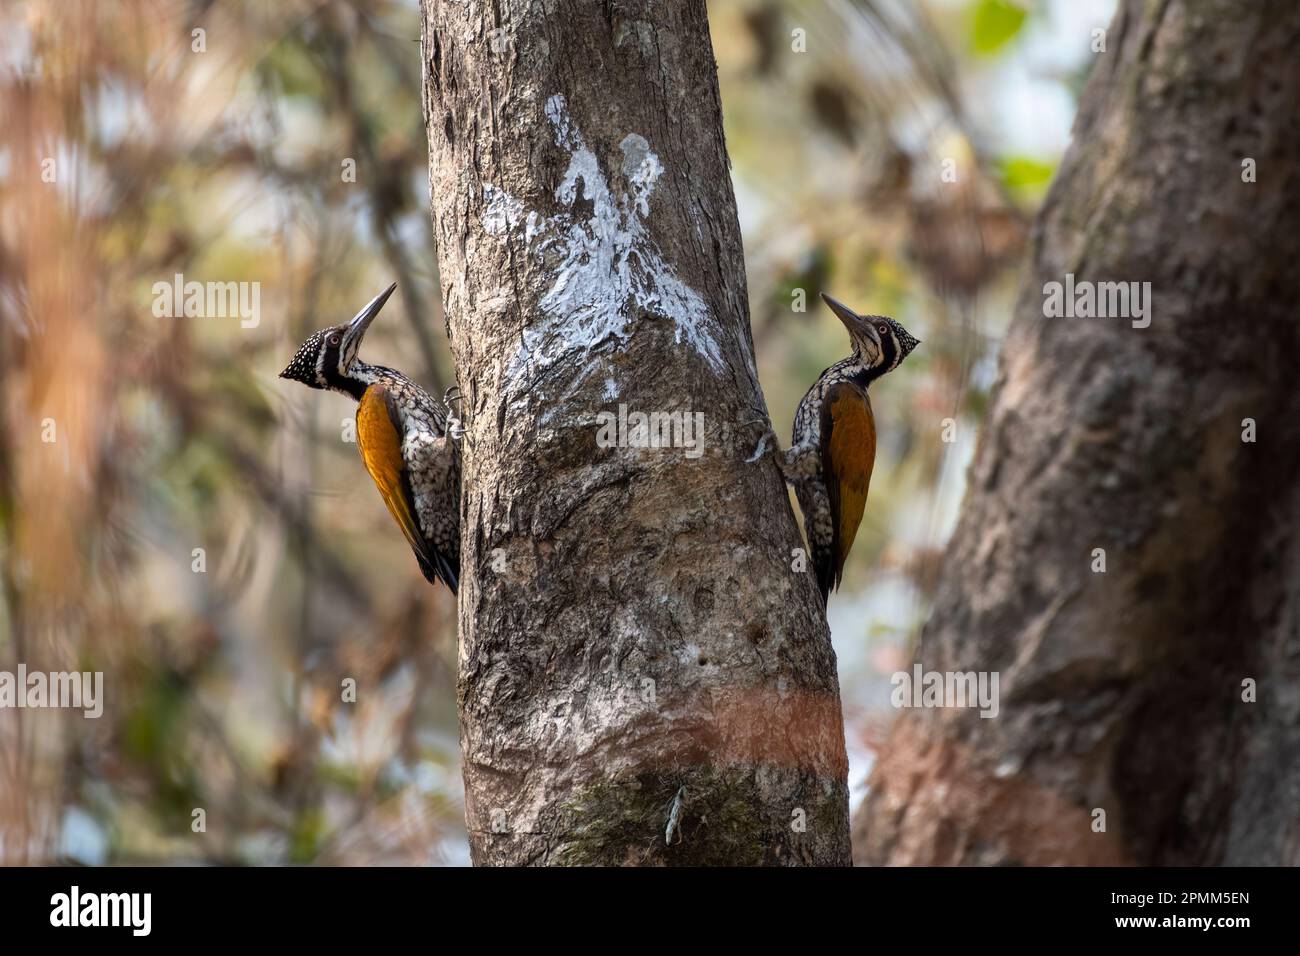 Greater flameback (Chrysocolaptes guttacristatus) also known as greater goldenback, large golden-backed woodpecker, observed in Rongtong in West Benga Stock Photo